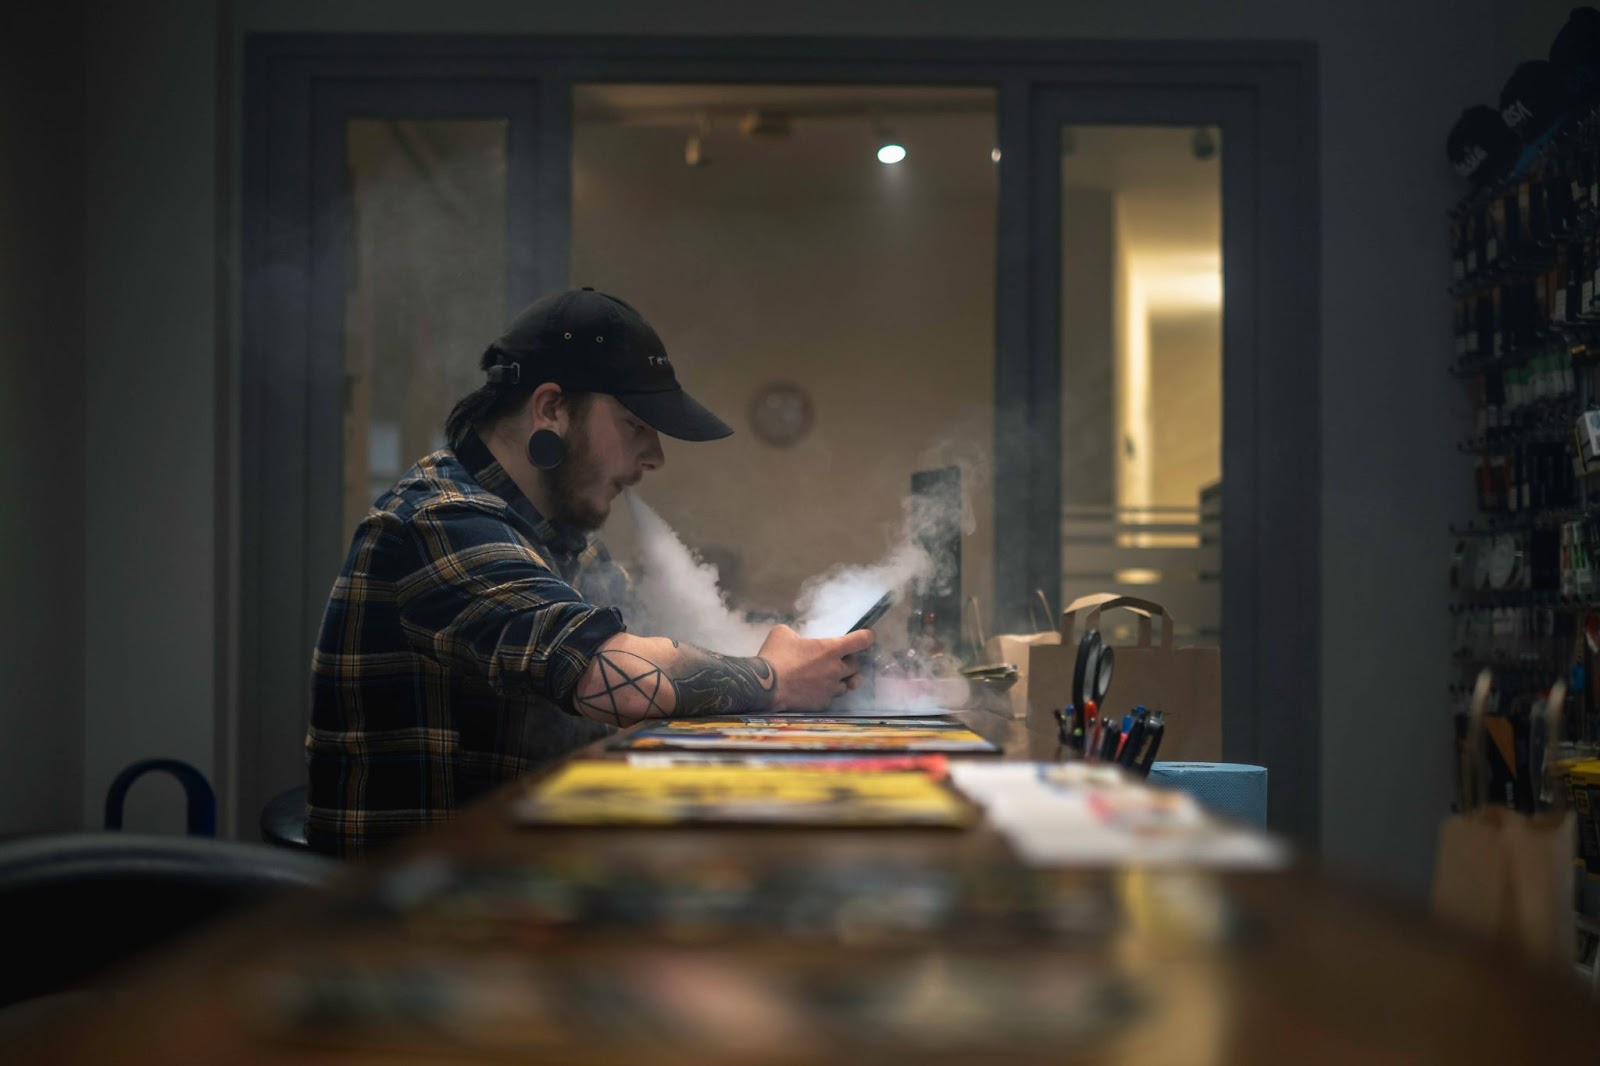 A man sat at a table on his phone and exhaling vapor from vape